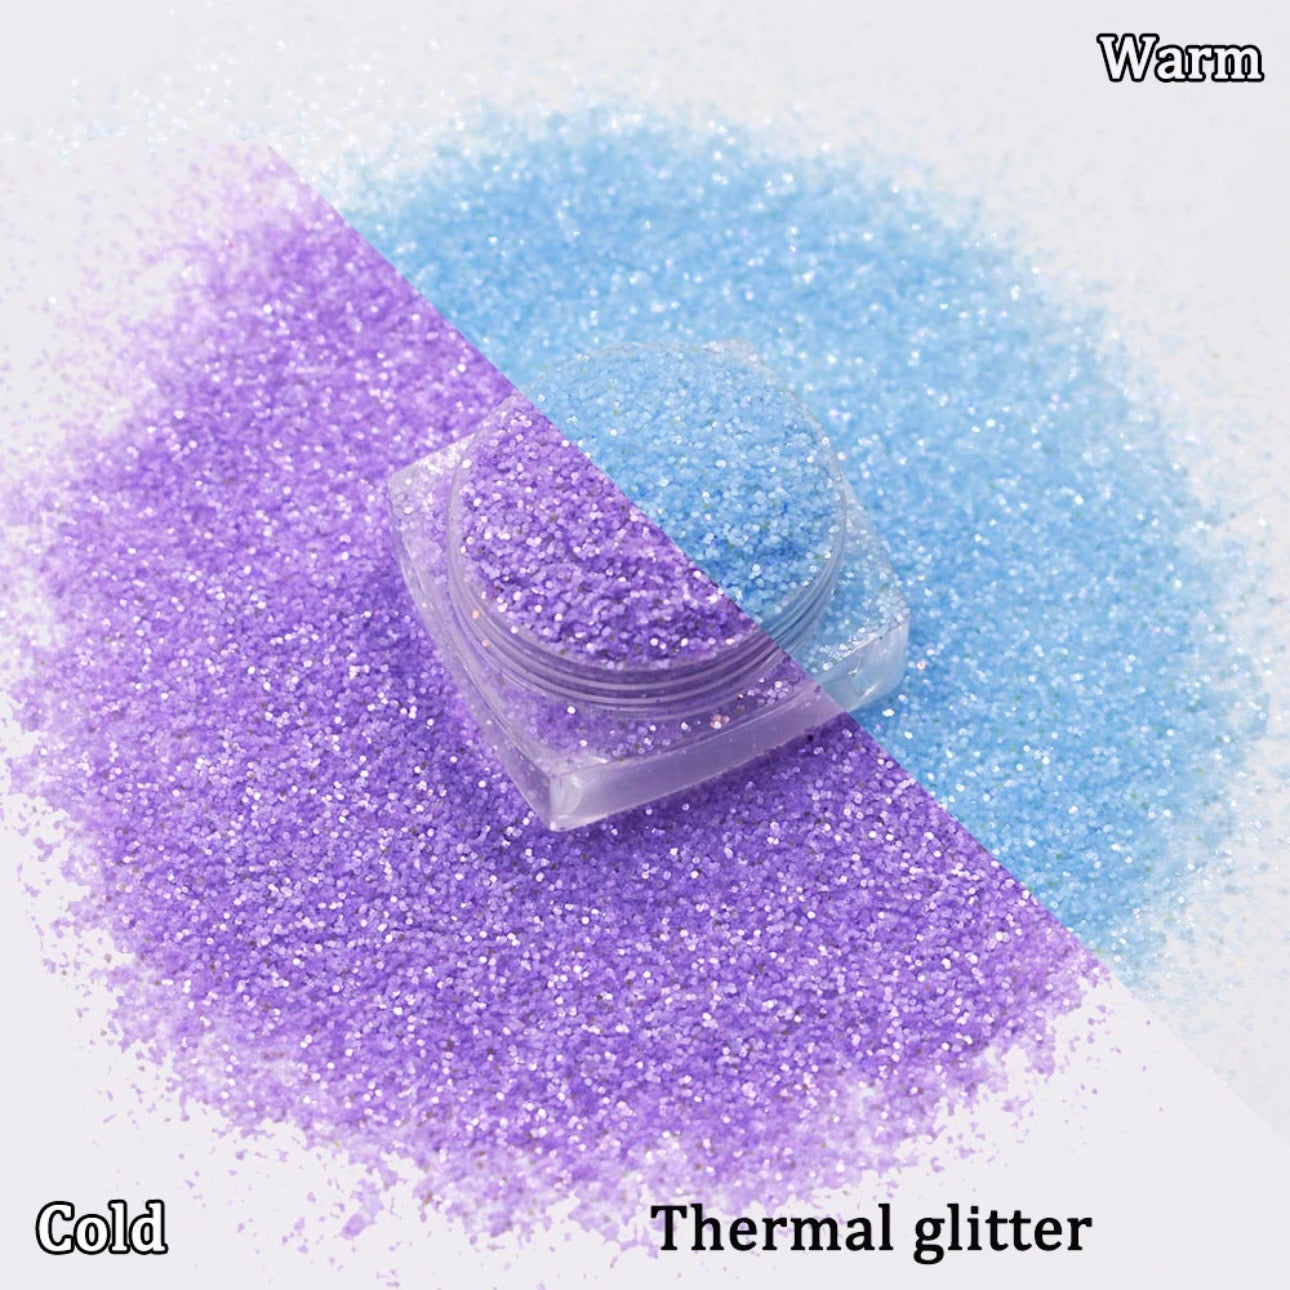 Cold Activated Thermal Glitter - Pink to Black